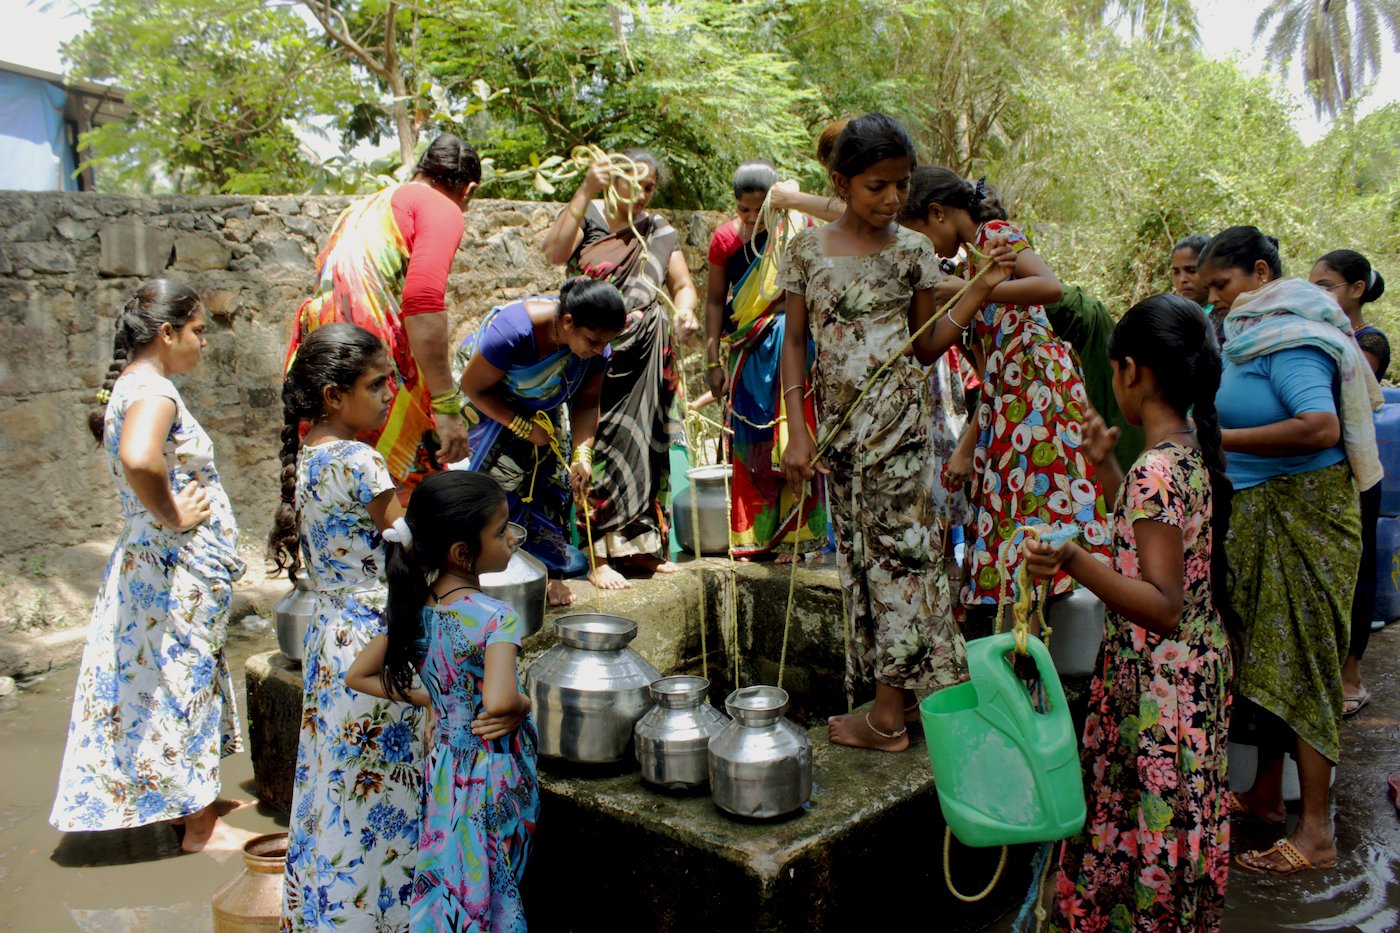 Women and young girls drawing water from well